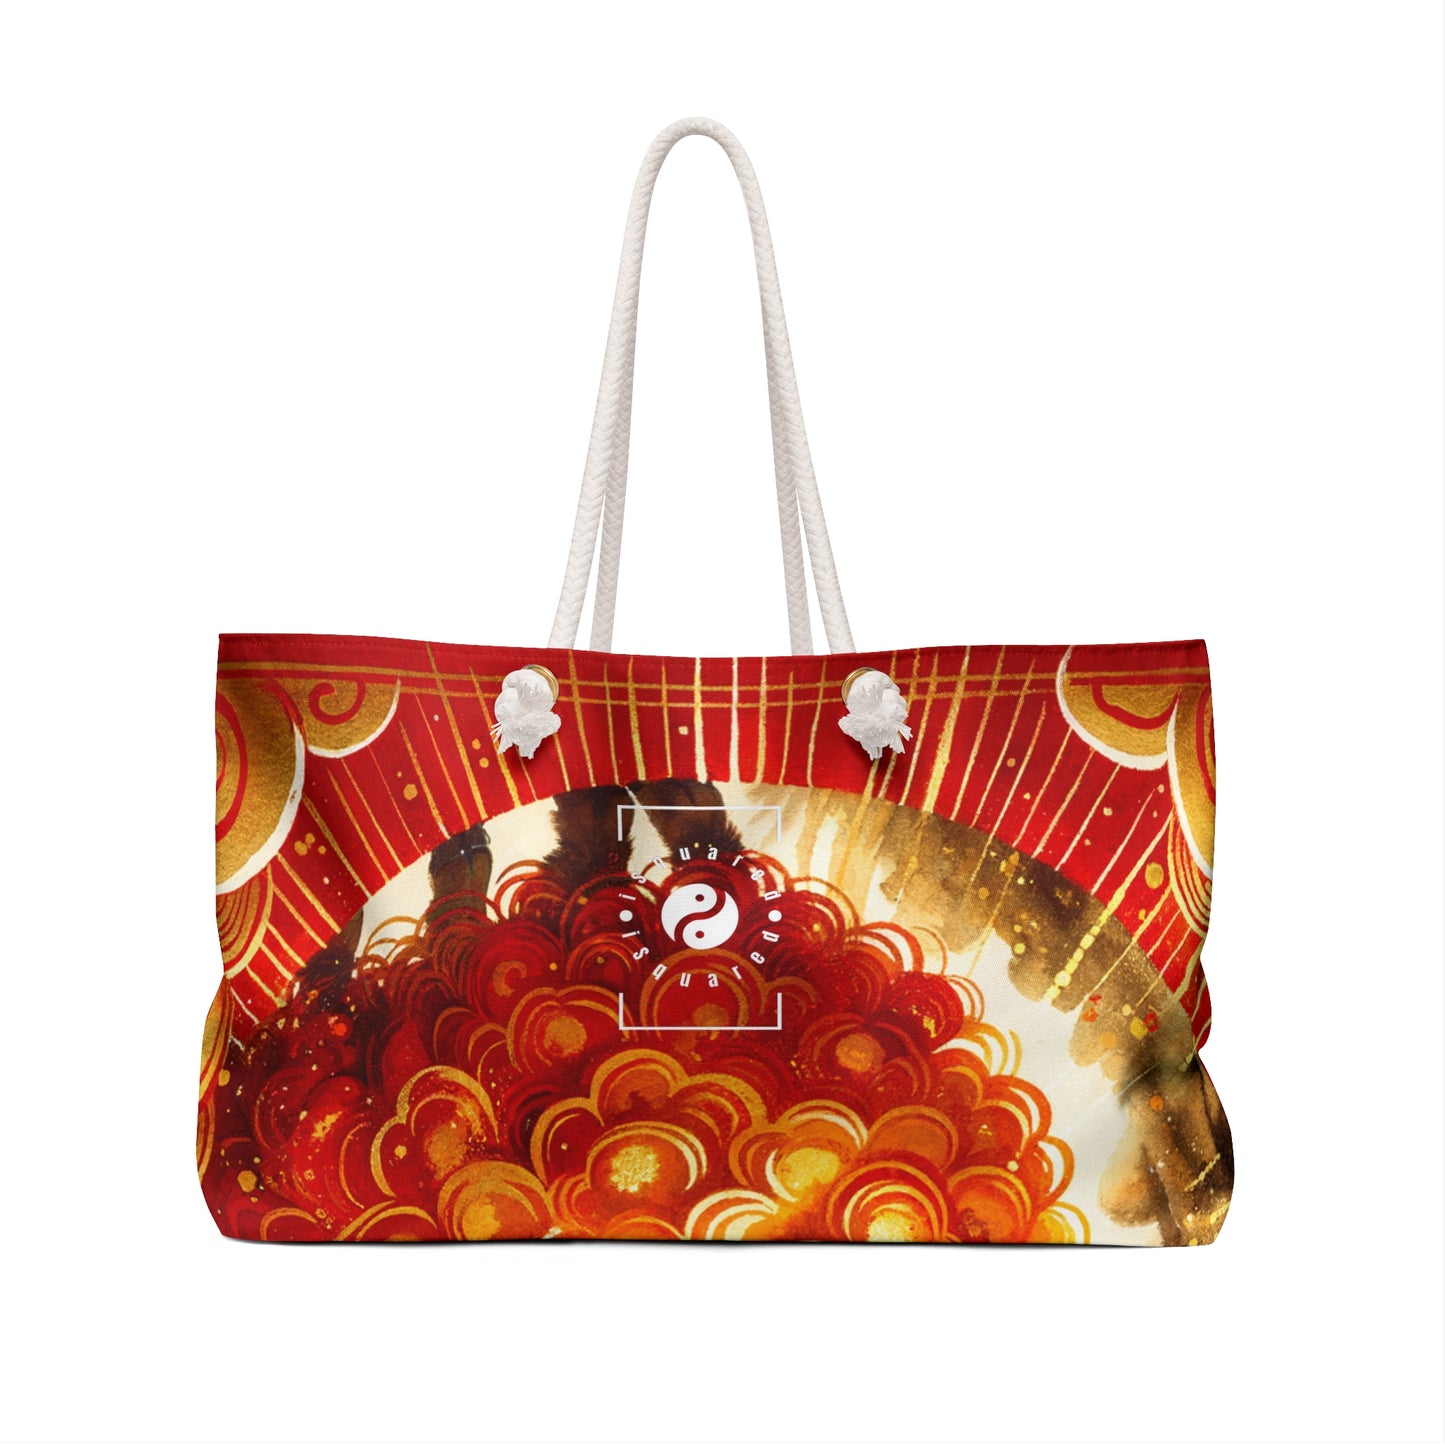 Celebrate Lunar New Year with Our Auspicious Gold Yoga Bag